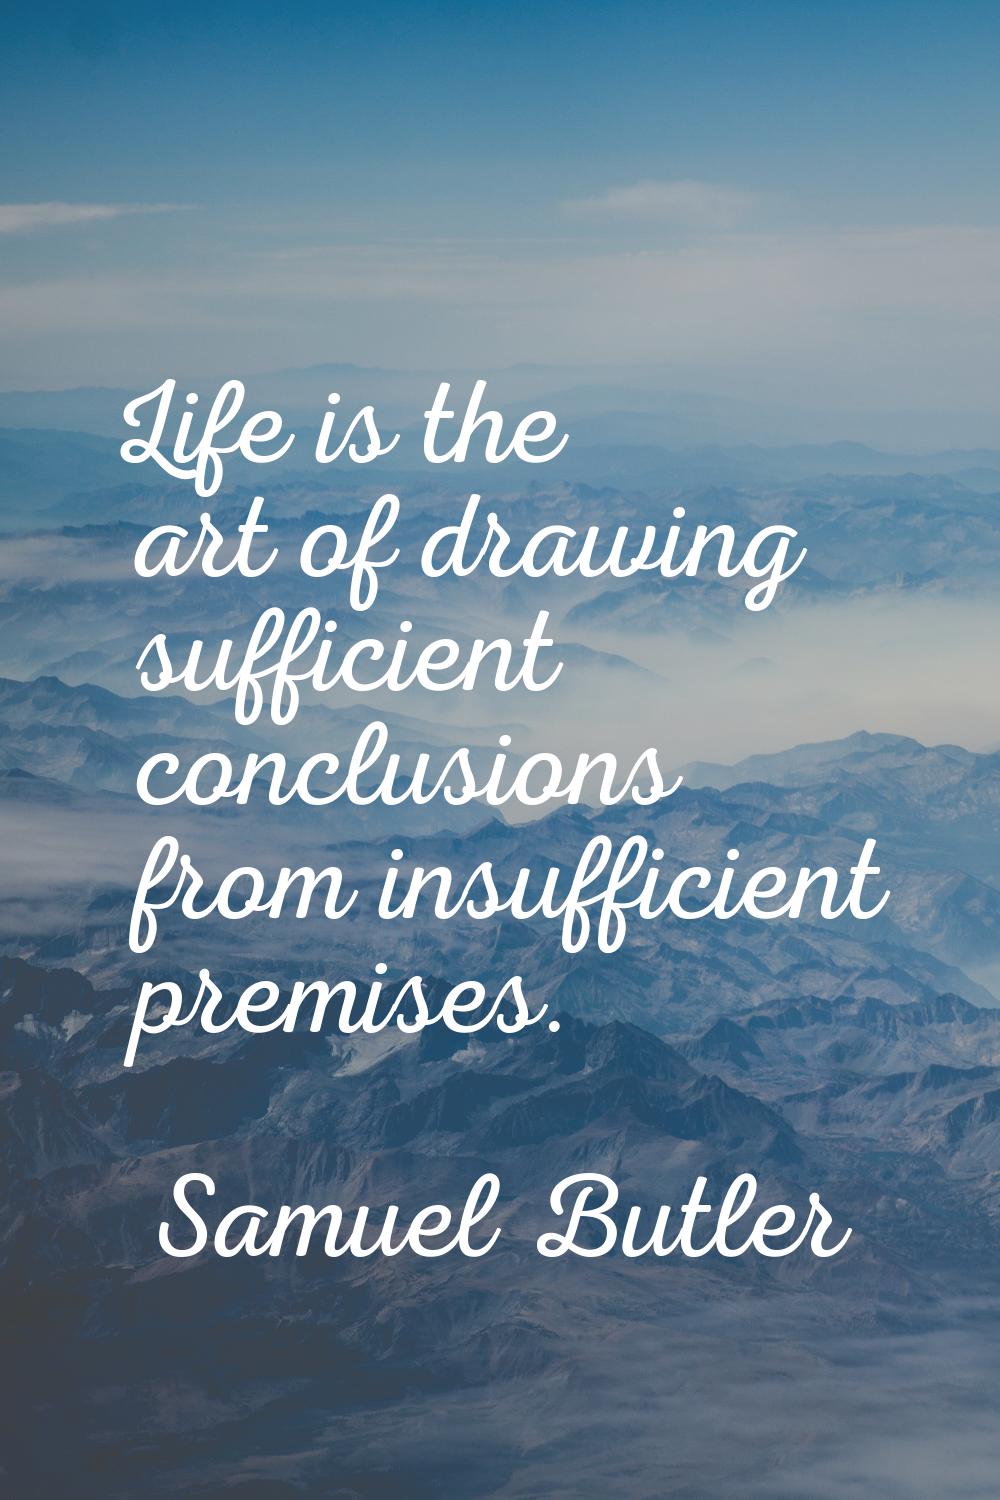 Life is the art of drawing sufficient conclusions from insufficient premises.